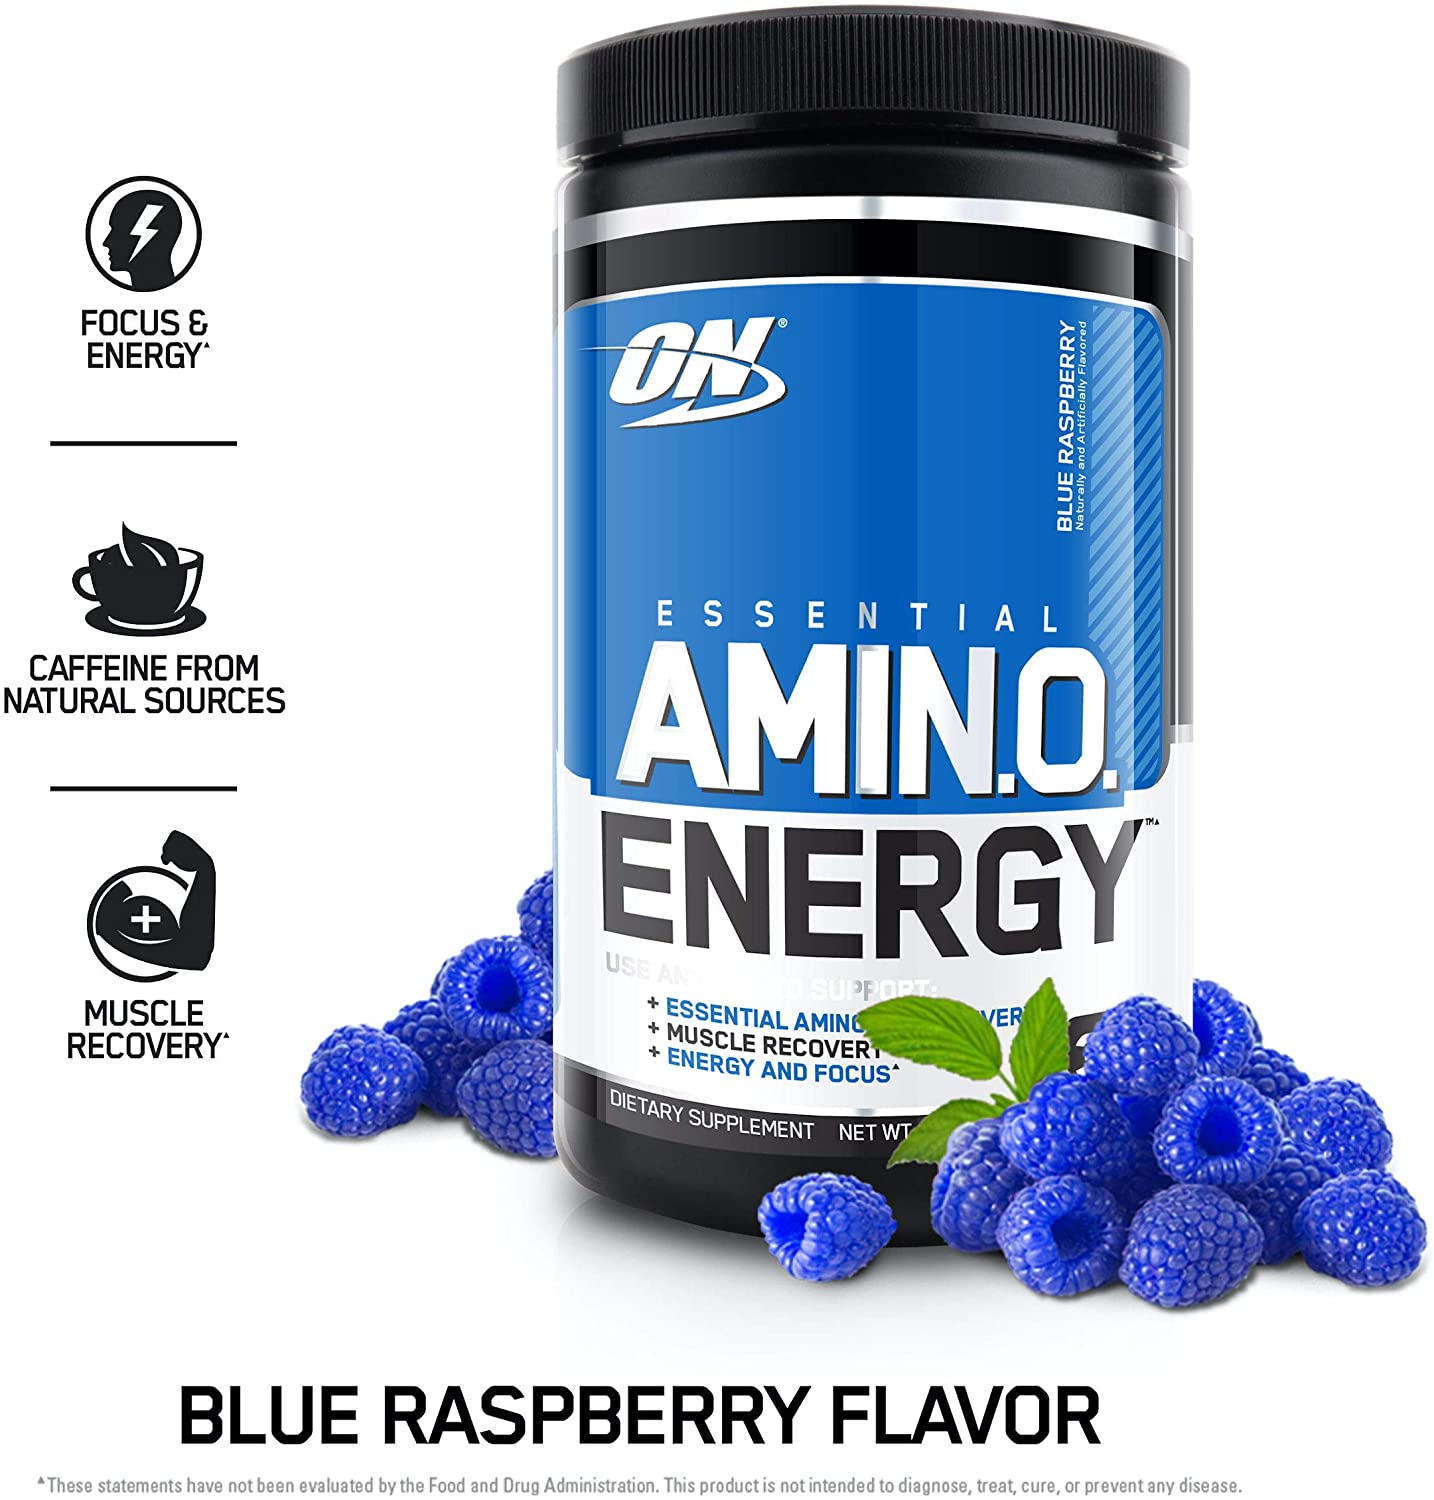 Amino Energy - Pre Workout with Green Tea, BCAA, Amino Acids, Keto Friendly, Green Coffee Extract, Energy Powder - Blue Raspberry, 30 Servings